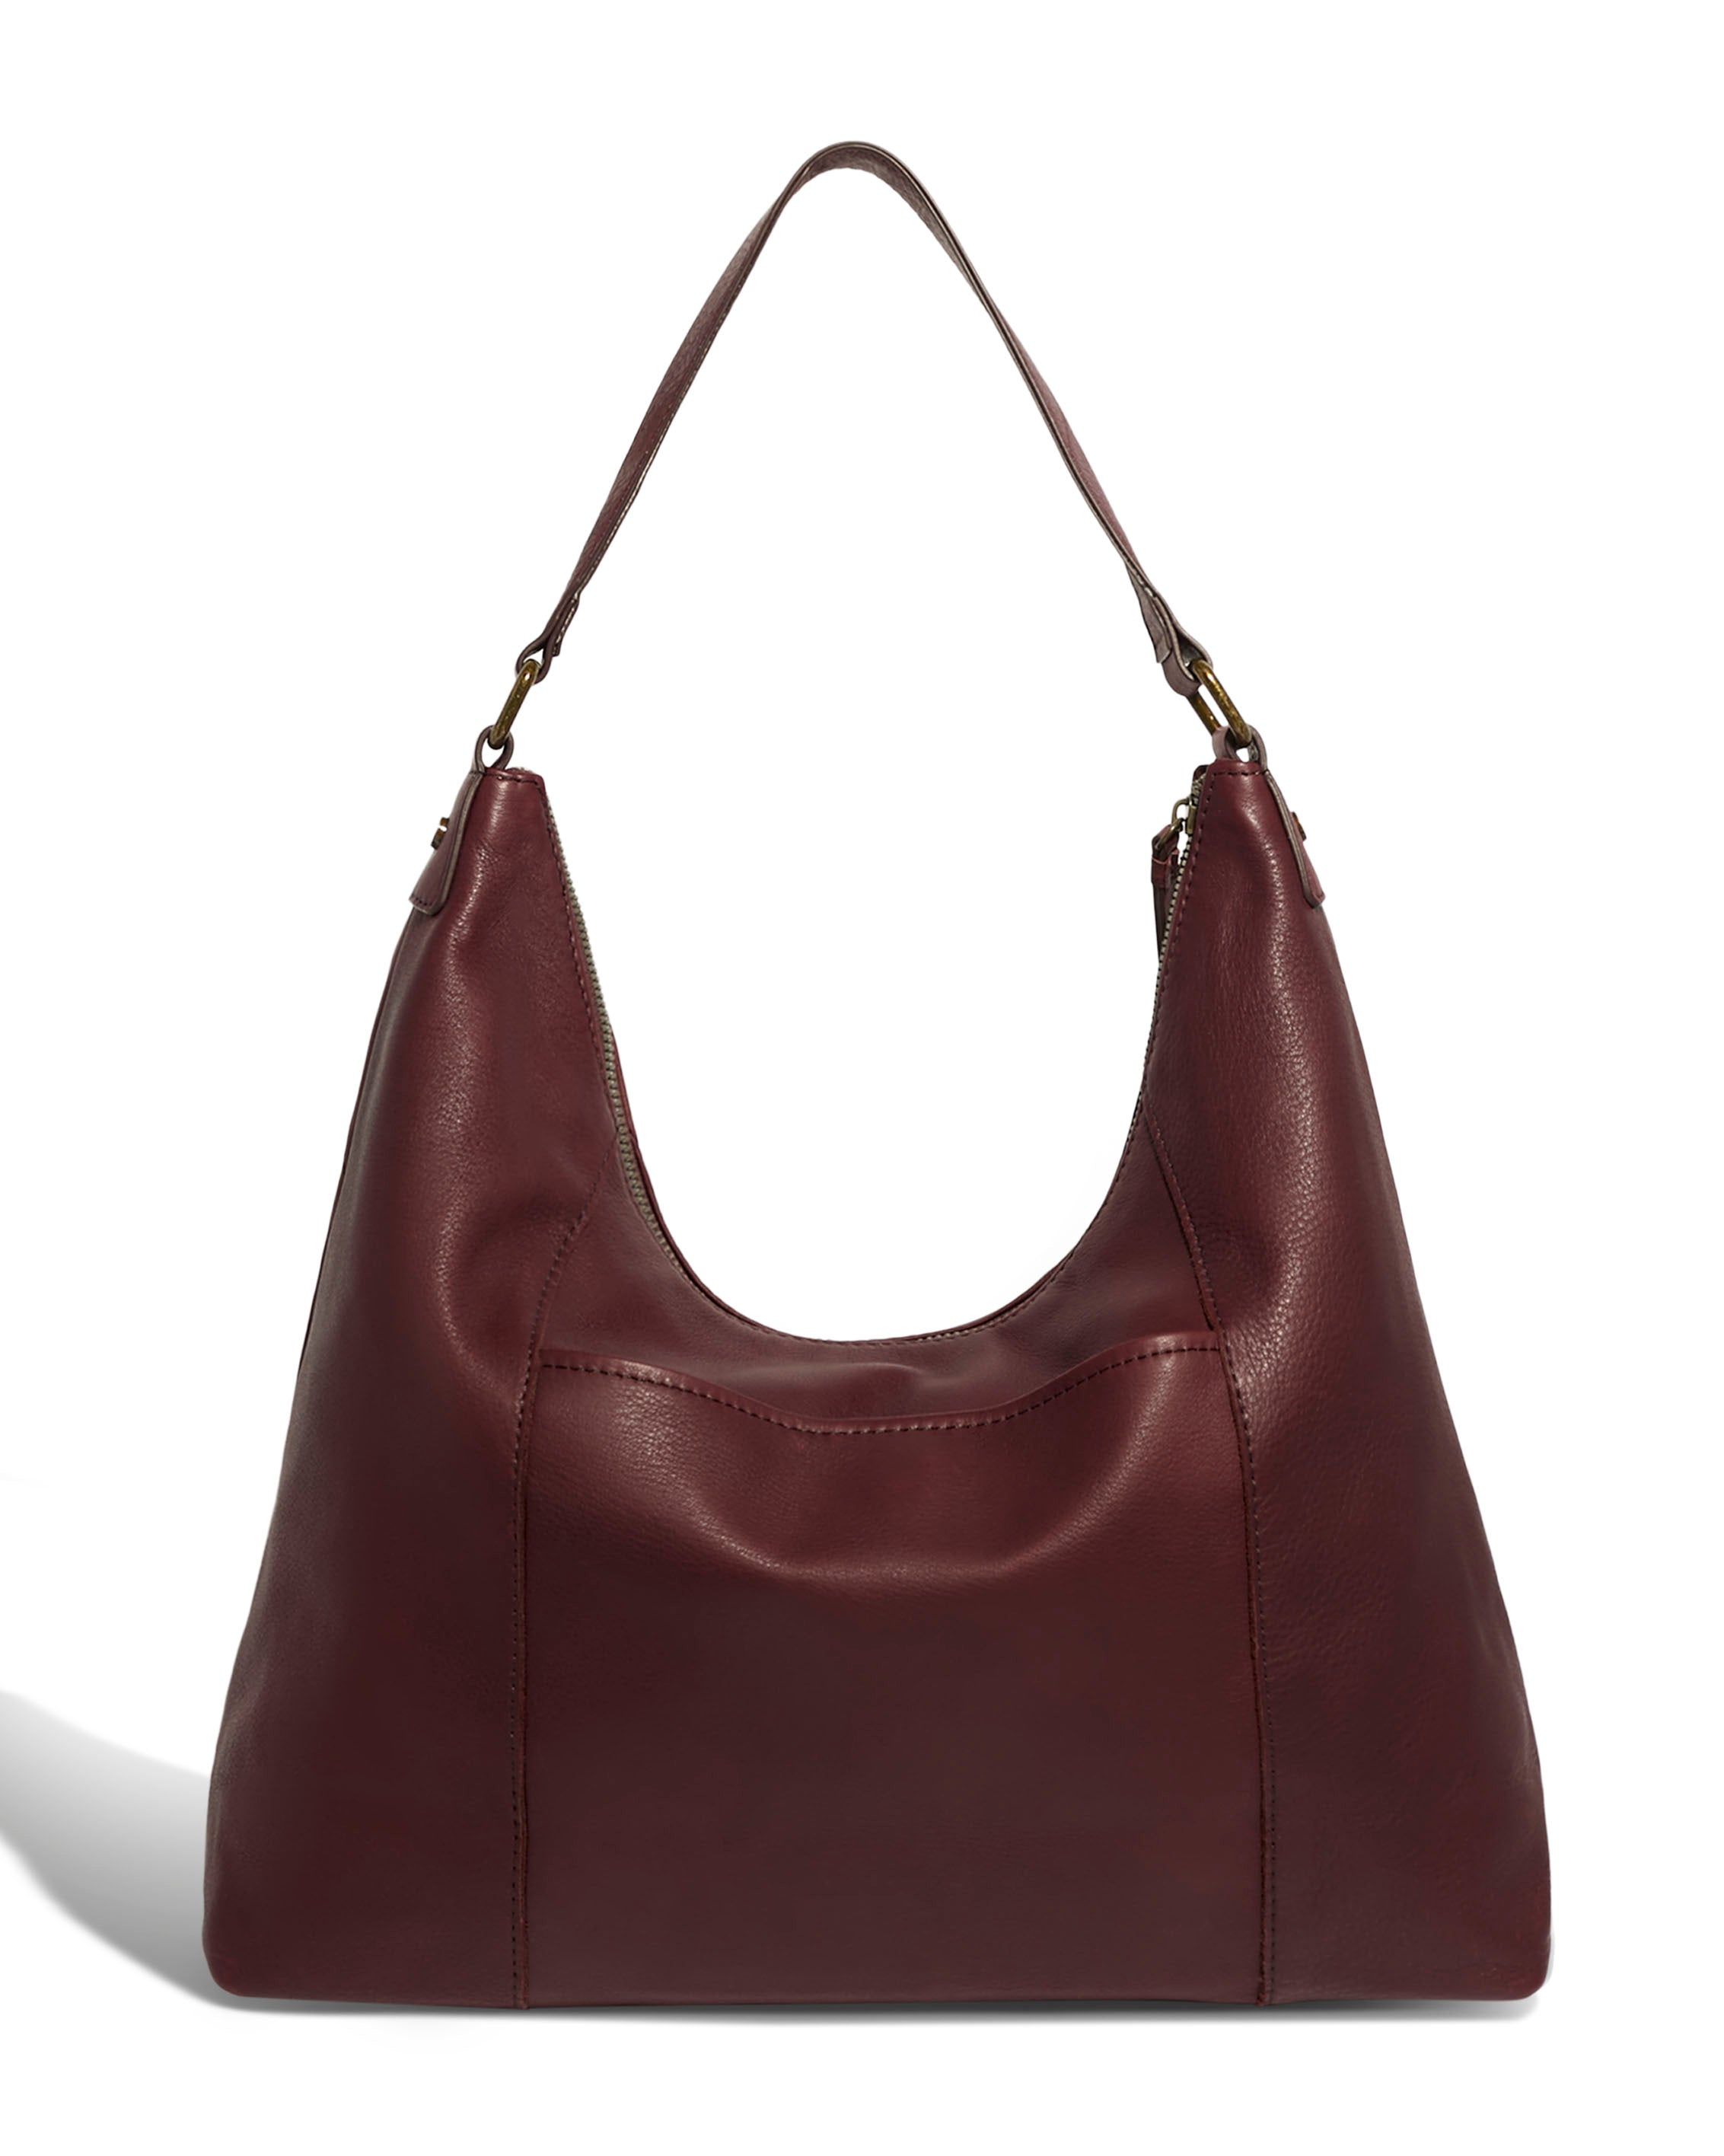 American Leather Co. Cobb Large Hobo